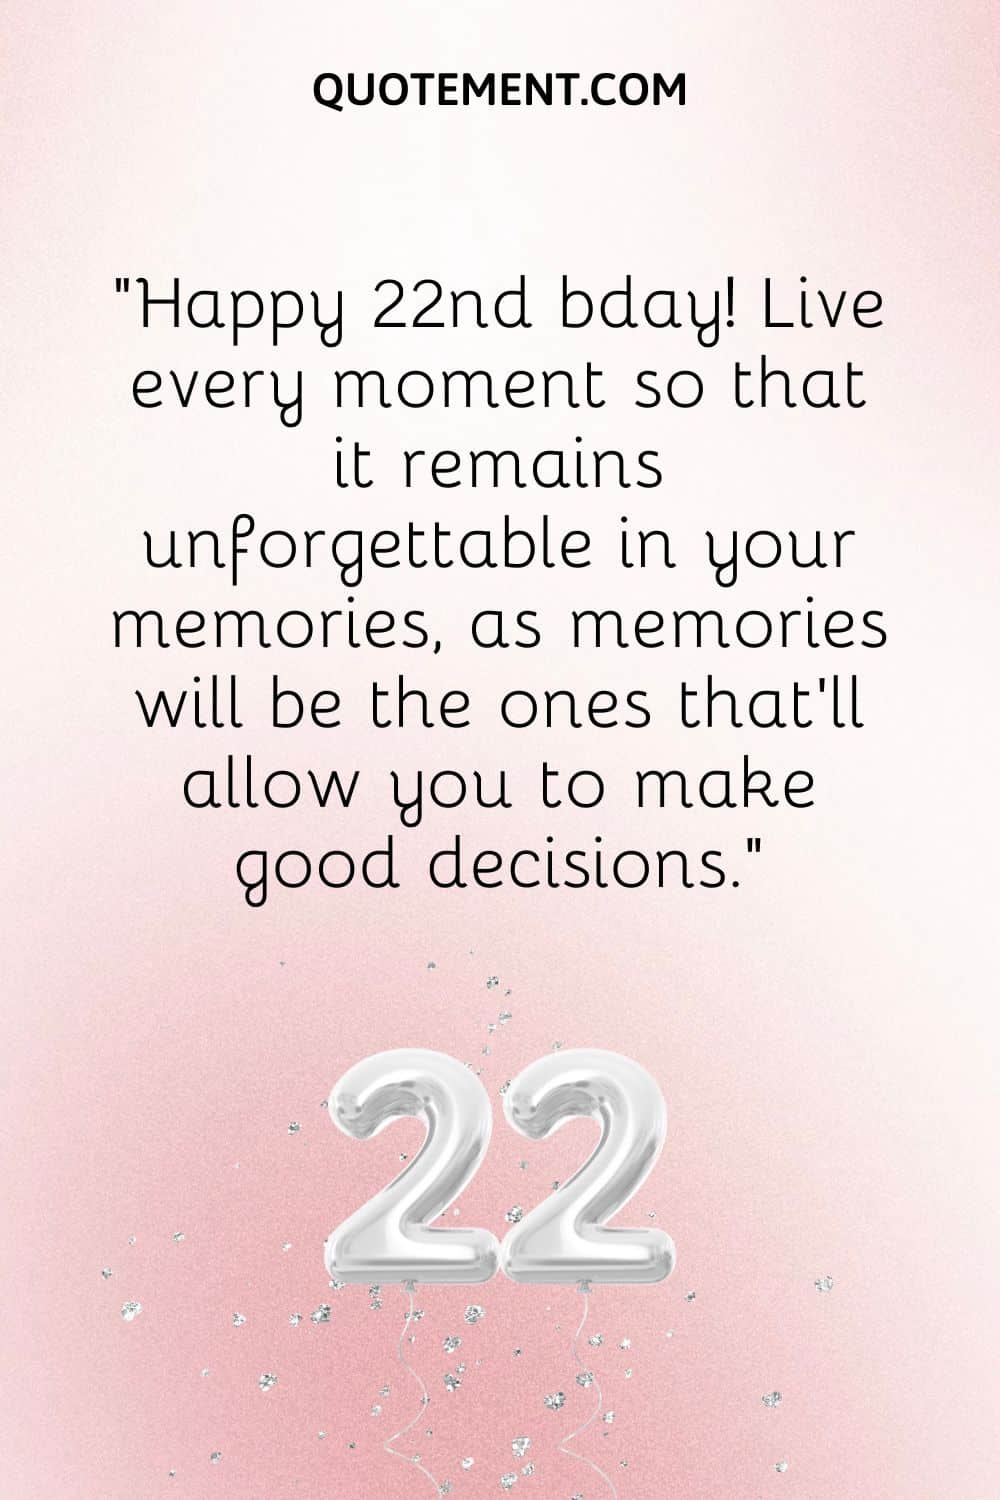 Happy 22nd bday! Live every moment so that it remains unforgettable in your memories, as memories will be the ones that’ll allow you to make good decisions.